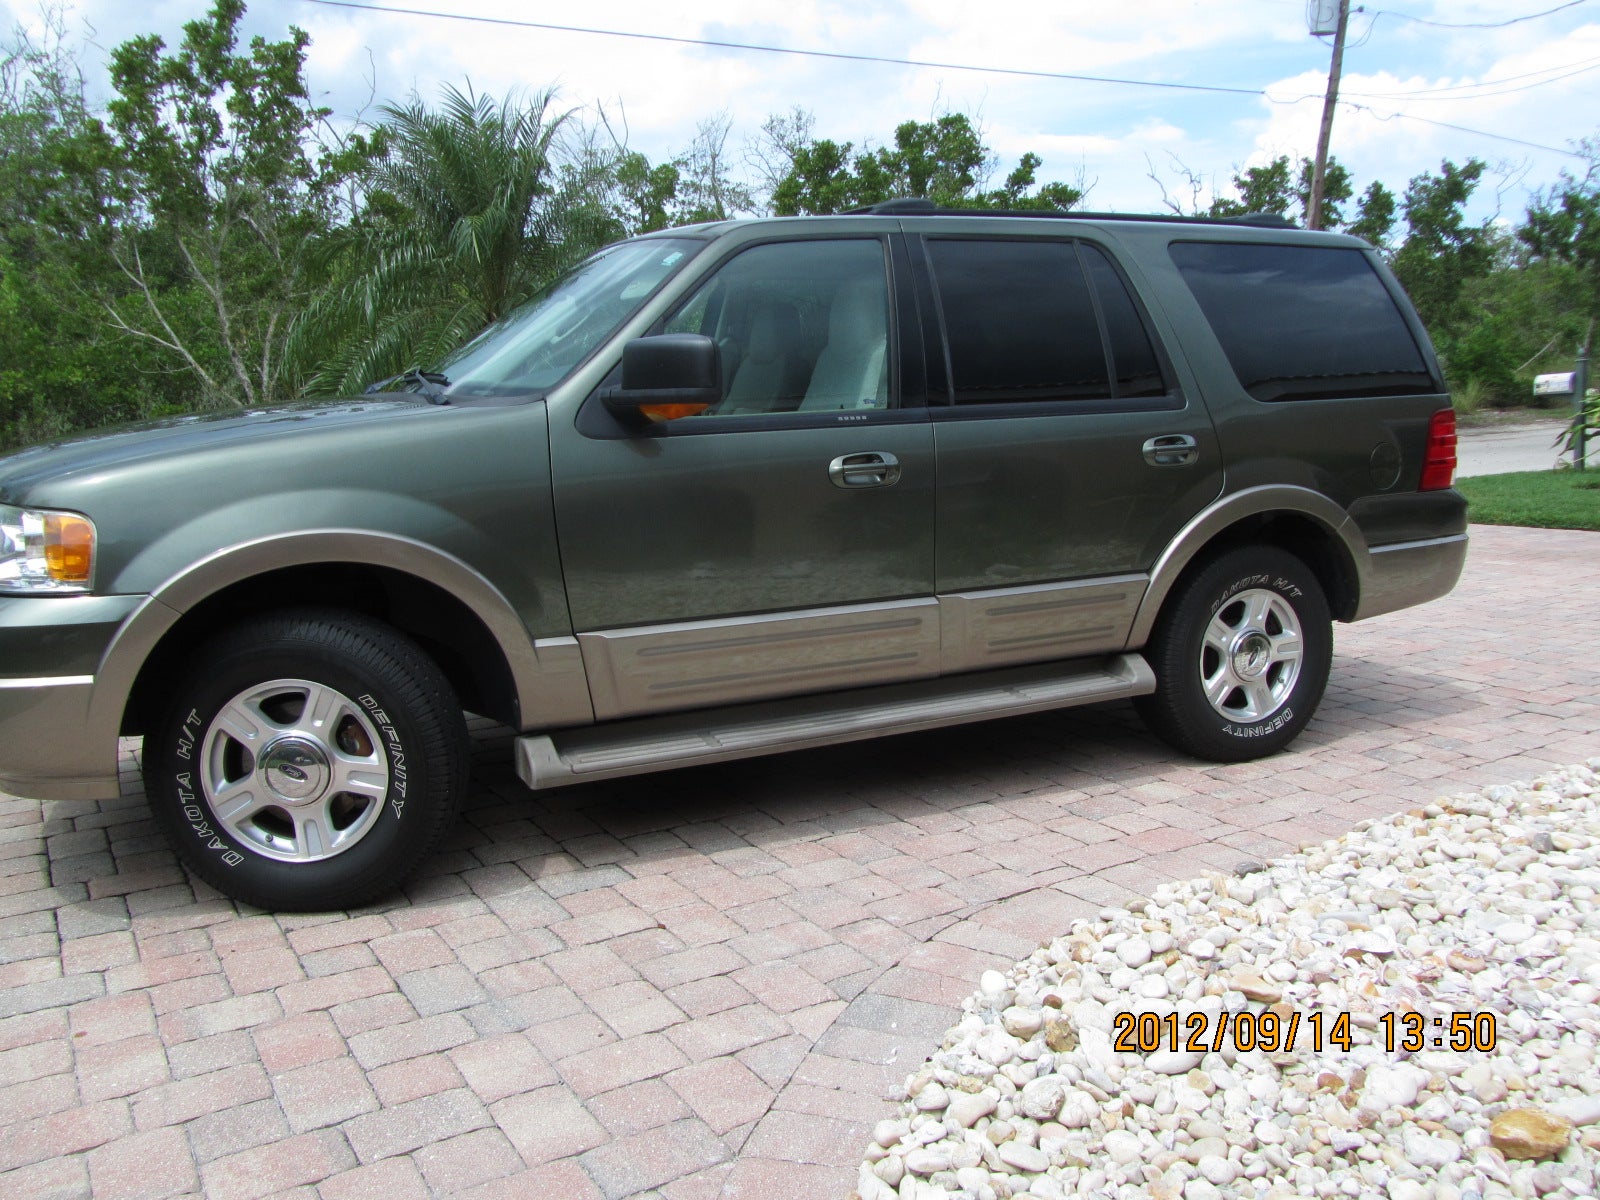 2004 Ford expedition eddie bauer owner manual #2